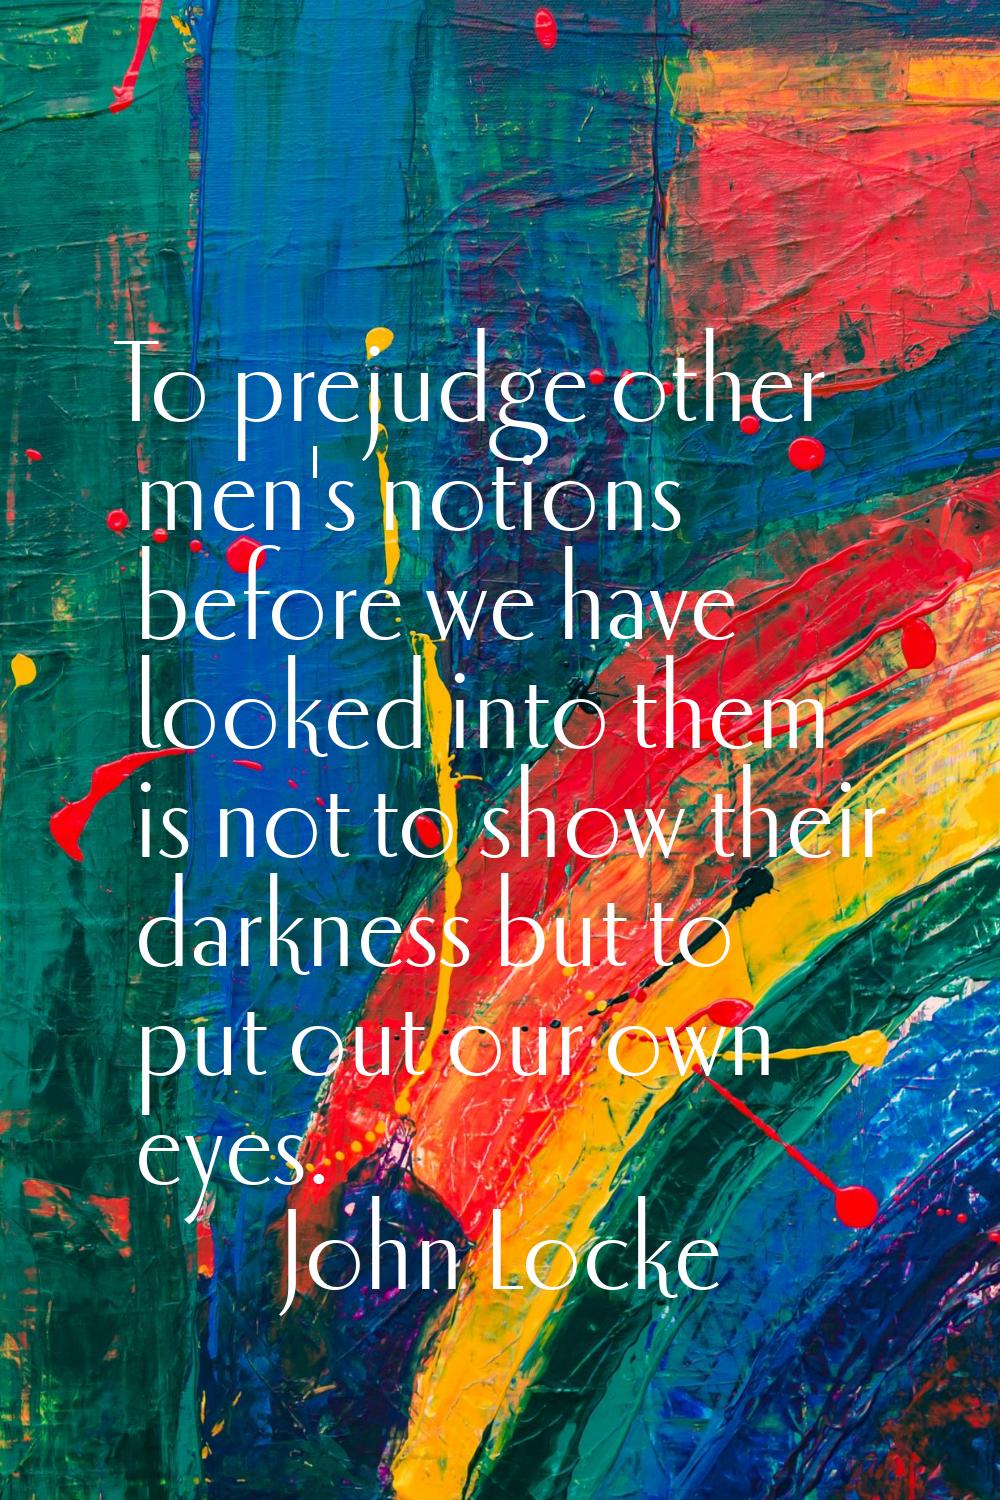 To prejudge other men's notions before we have looked into them is not to show their darkness but t